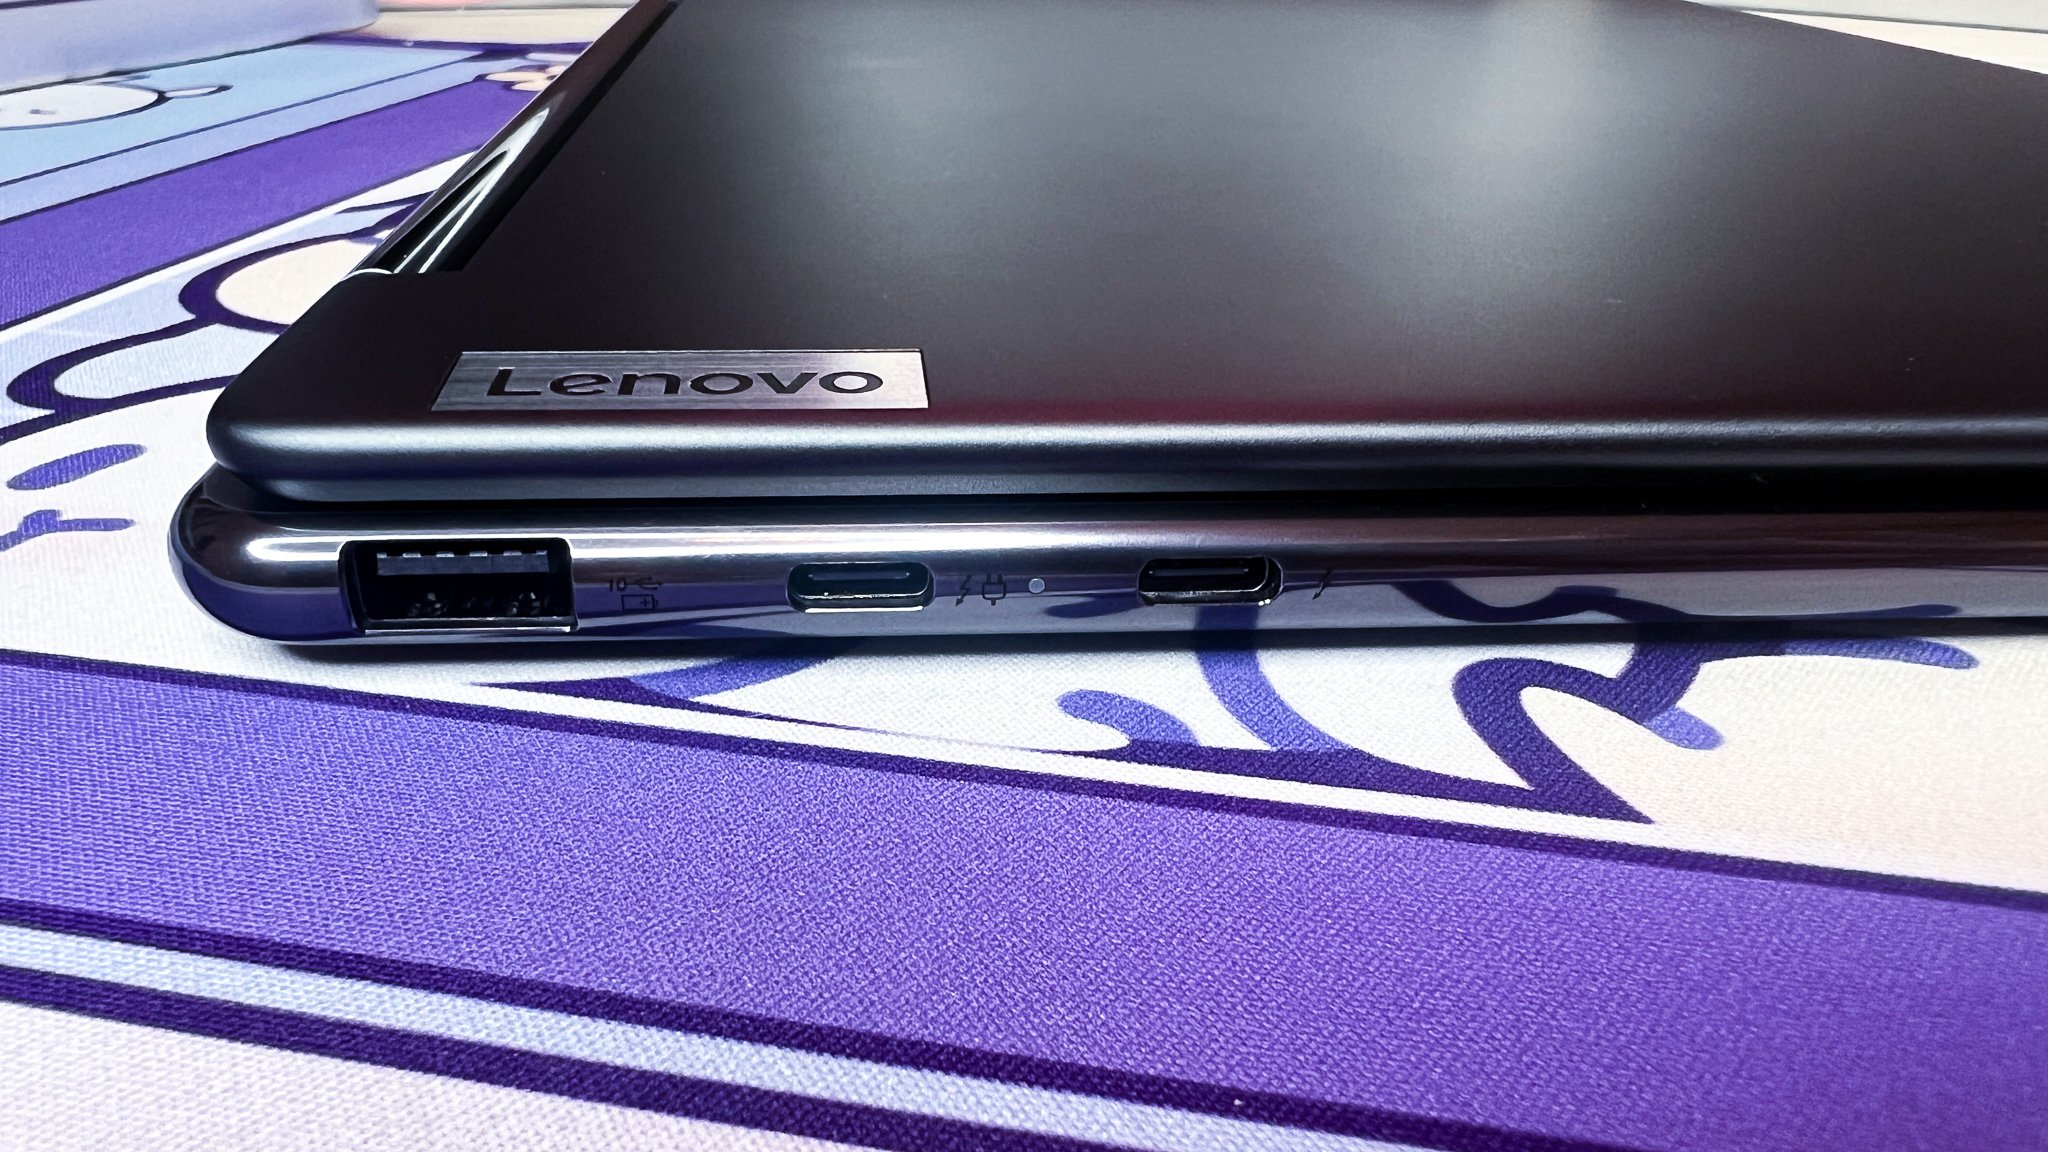 Lenovo Yoga 9i Review: A good laptop, but a bad tablet - Reviewed